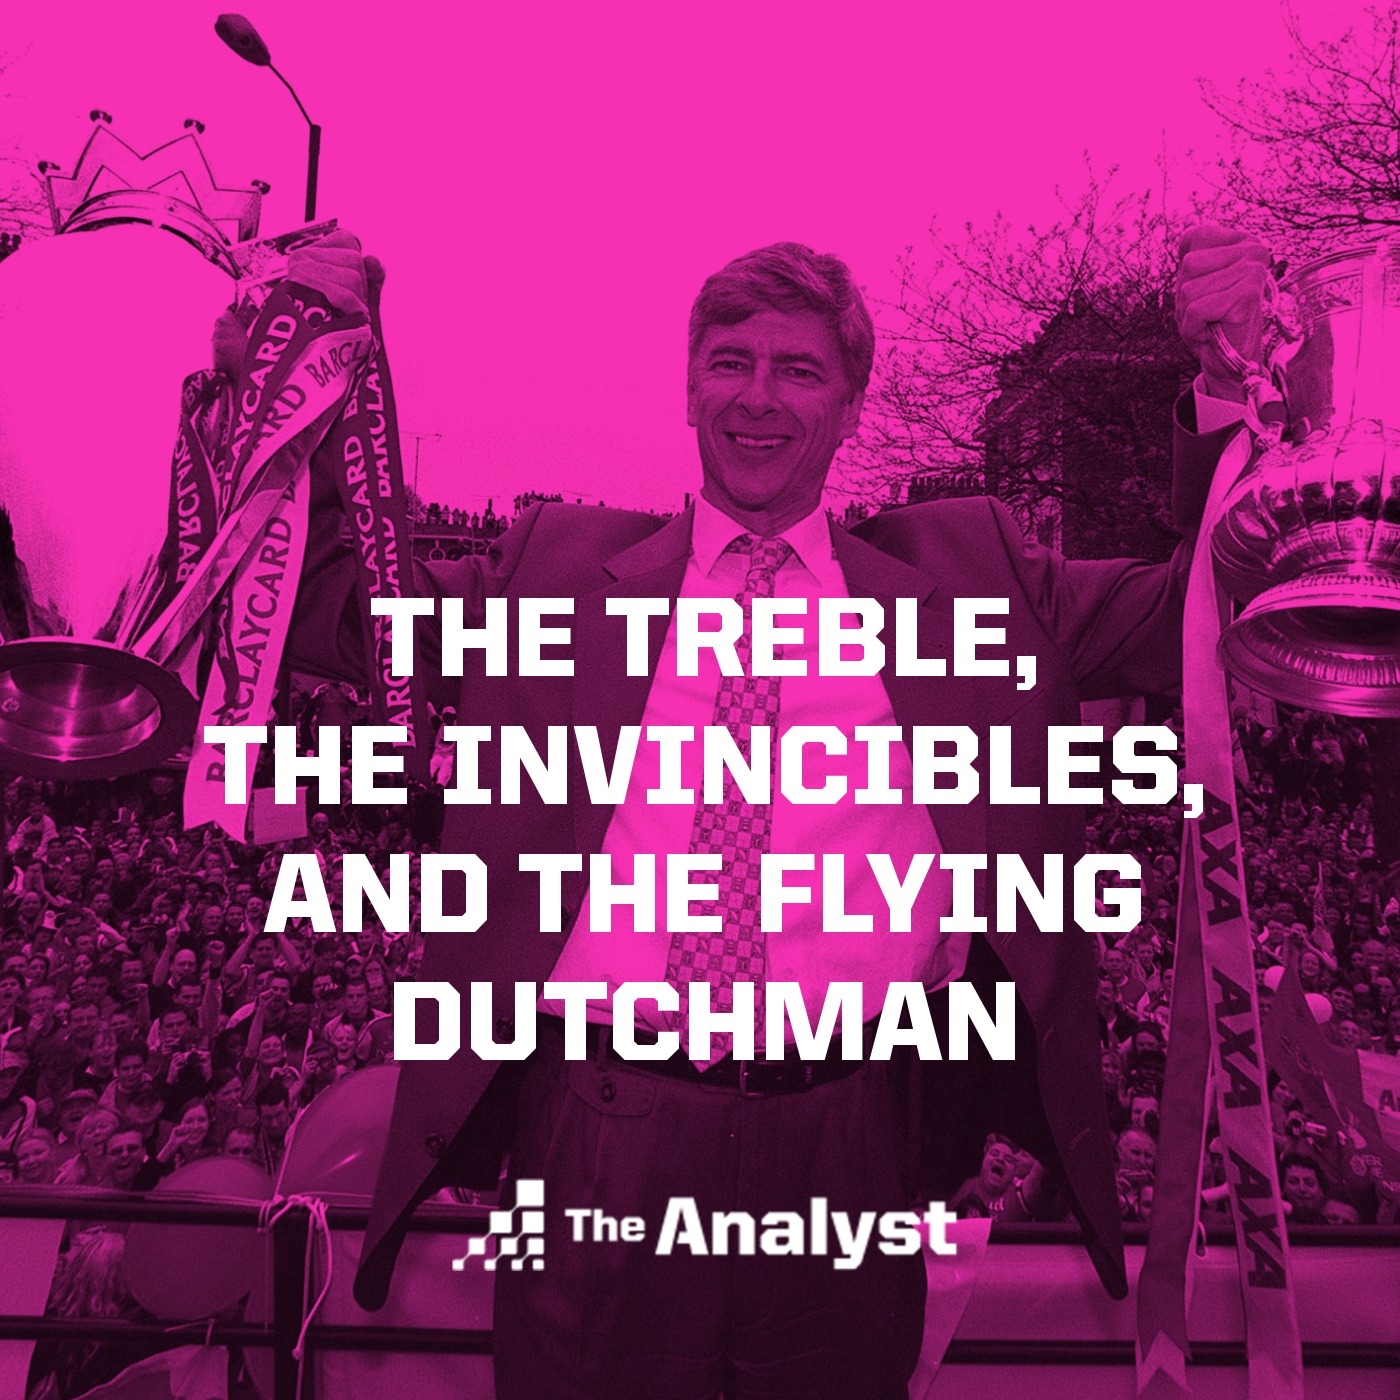 Premier League Seasons Part II: The Treble, the Invincibles and the Flying Dutchman